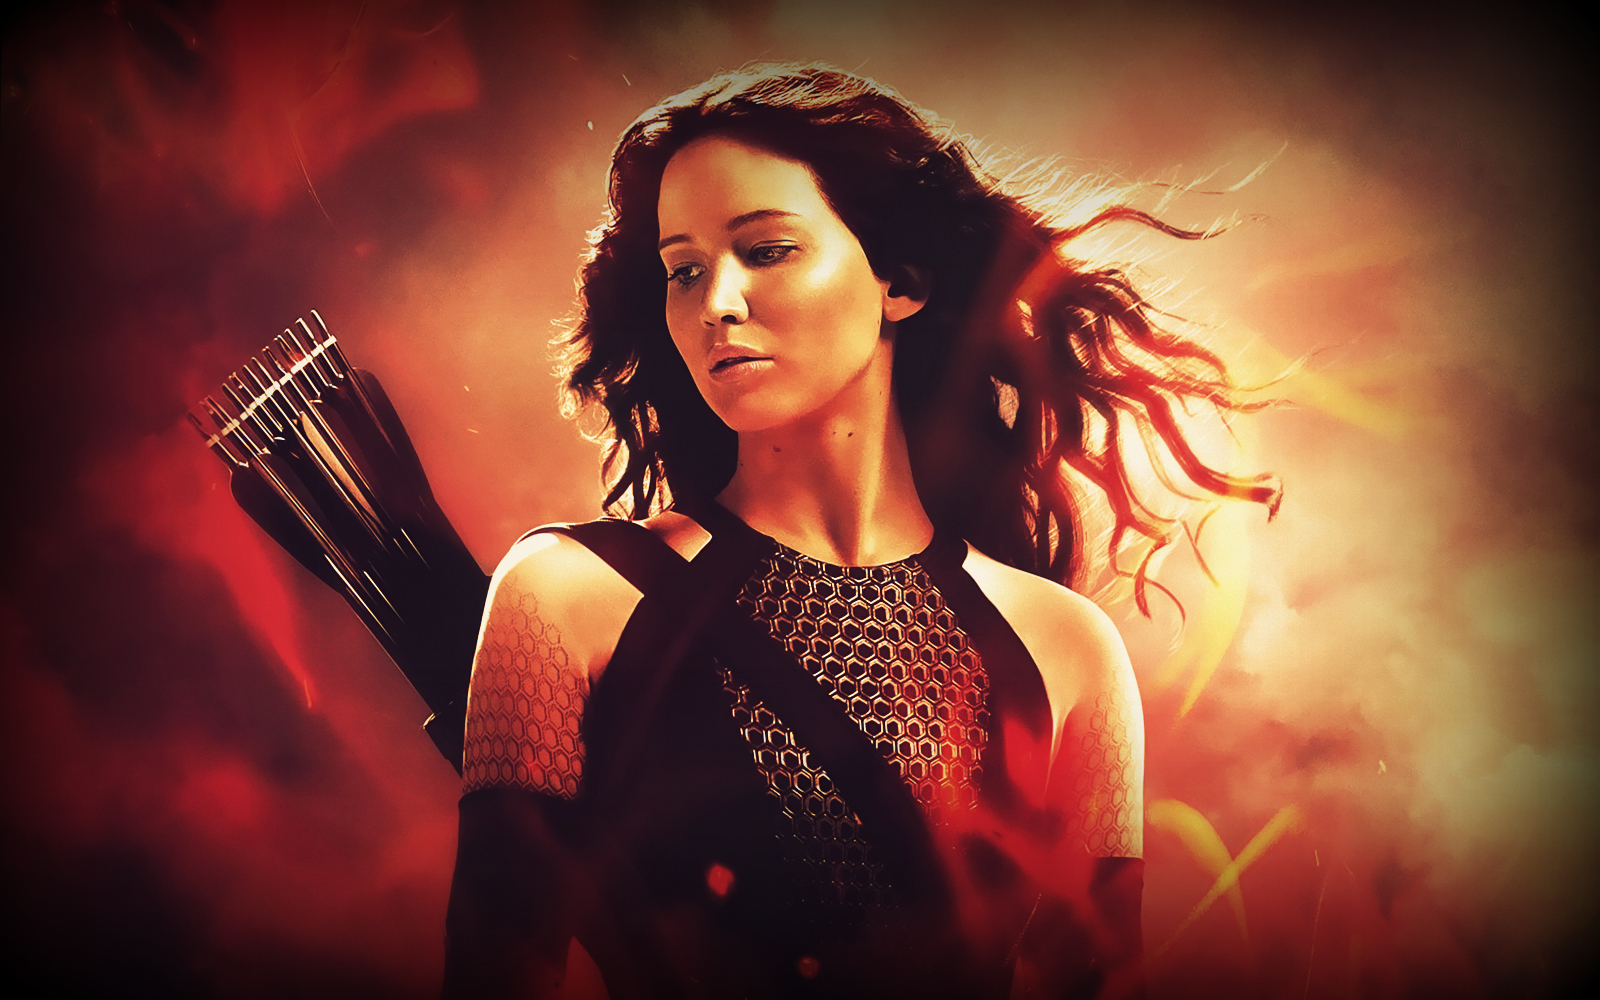 New Wallpaper Of Jennifer Lawrence As Katniss In Catching Fire Movie